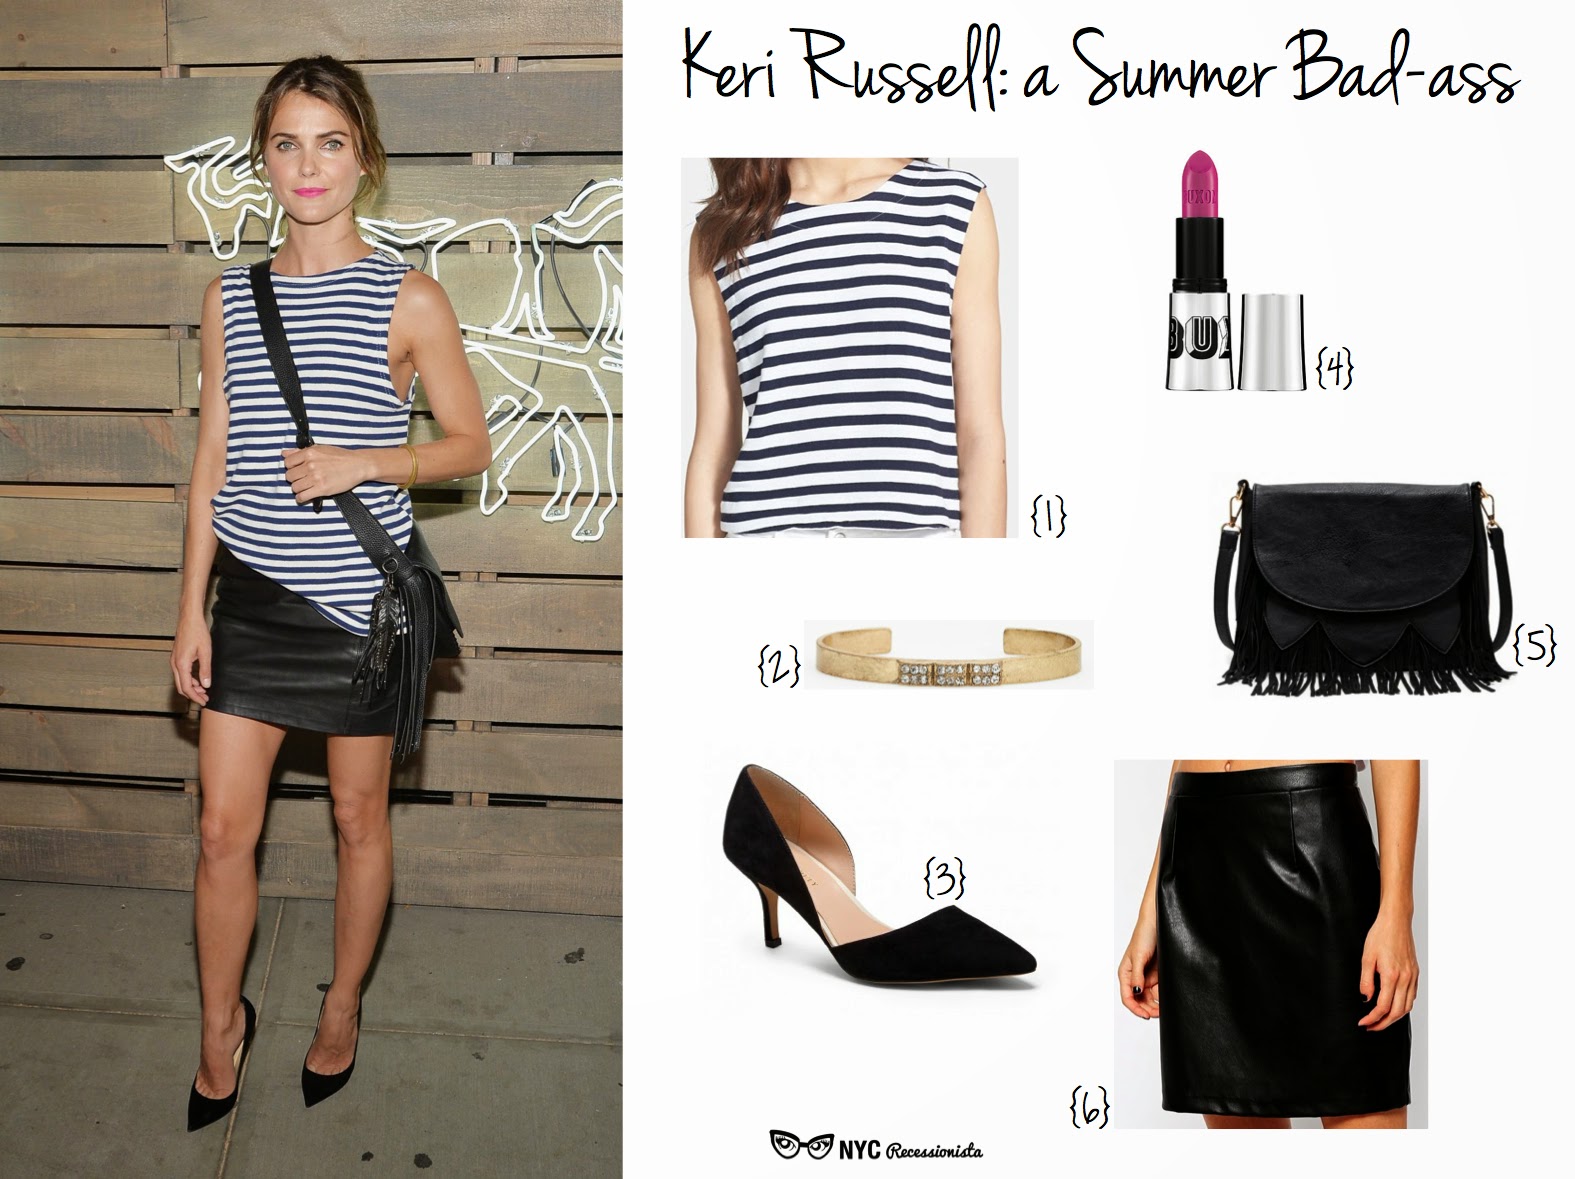 Outstanding Outfits: Keri Russell is a summer bad-ass - NYC